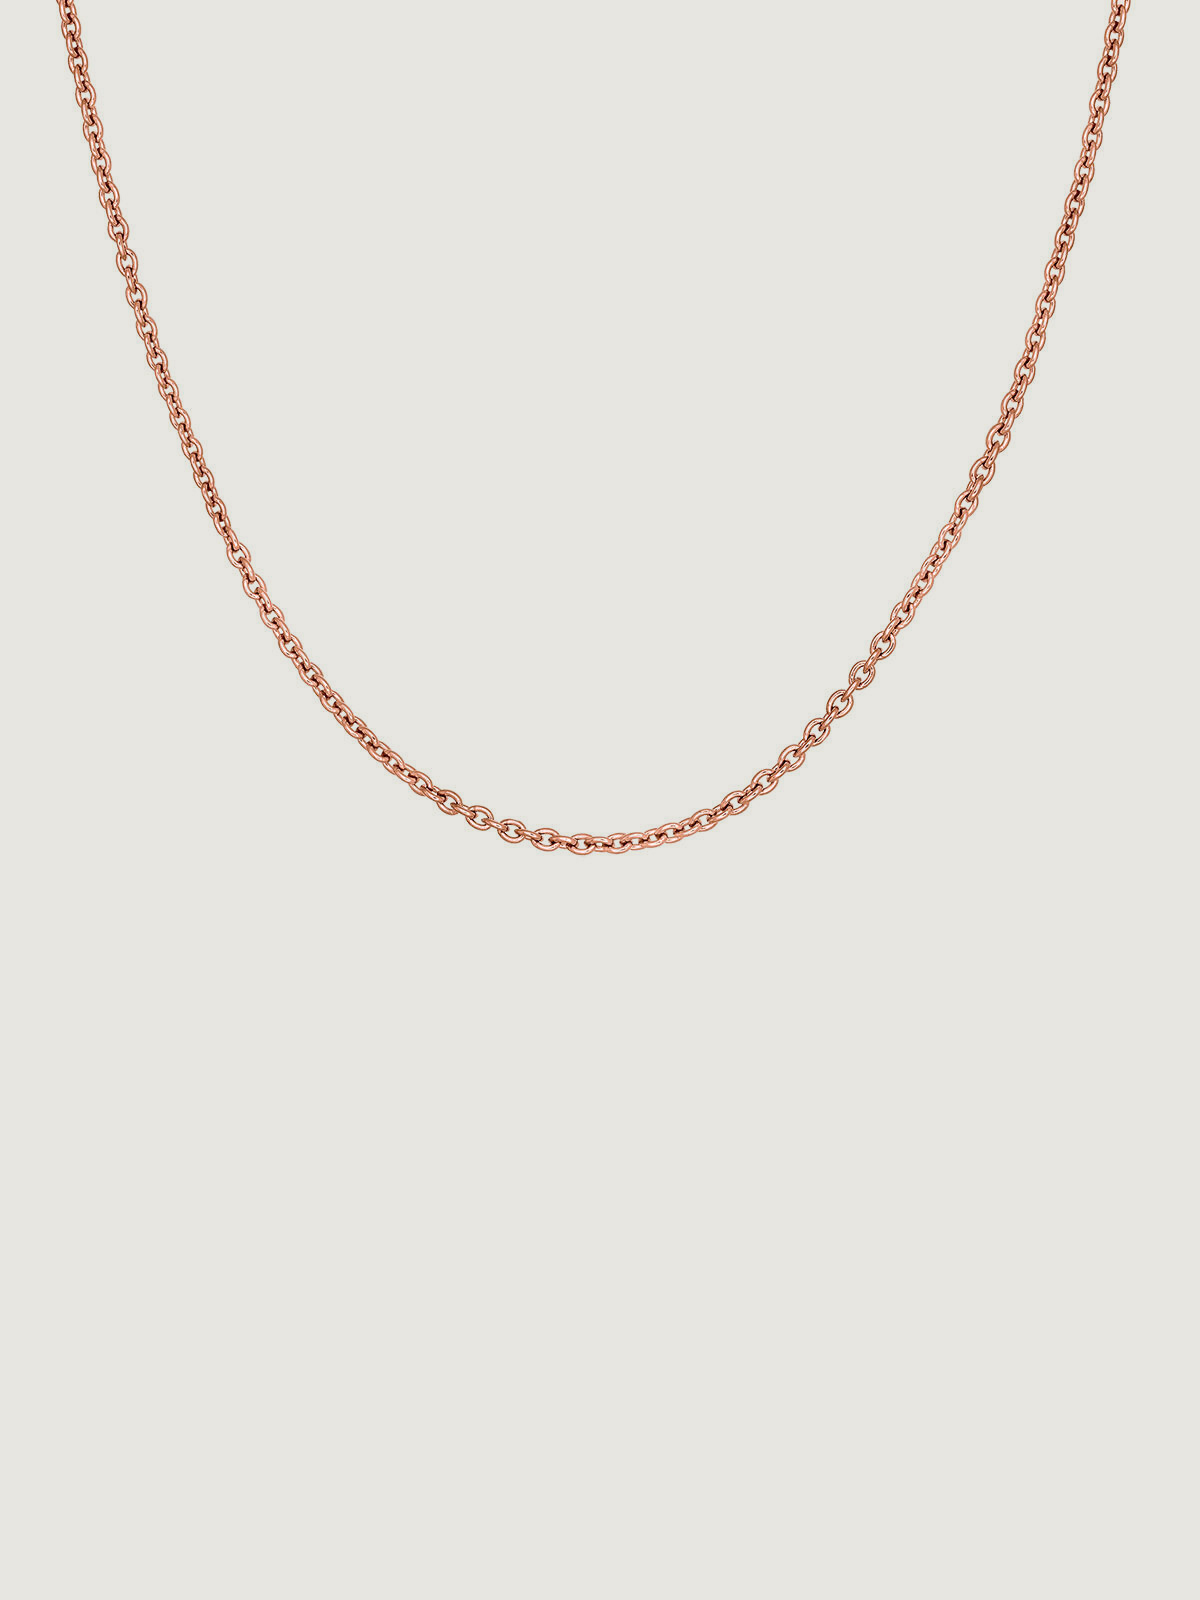 Simple 925 silver chain bathed in 18K rose gold